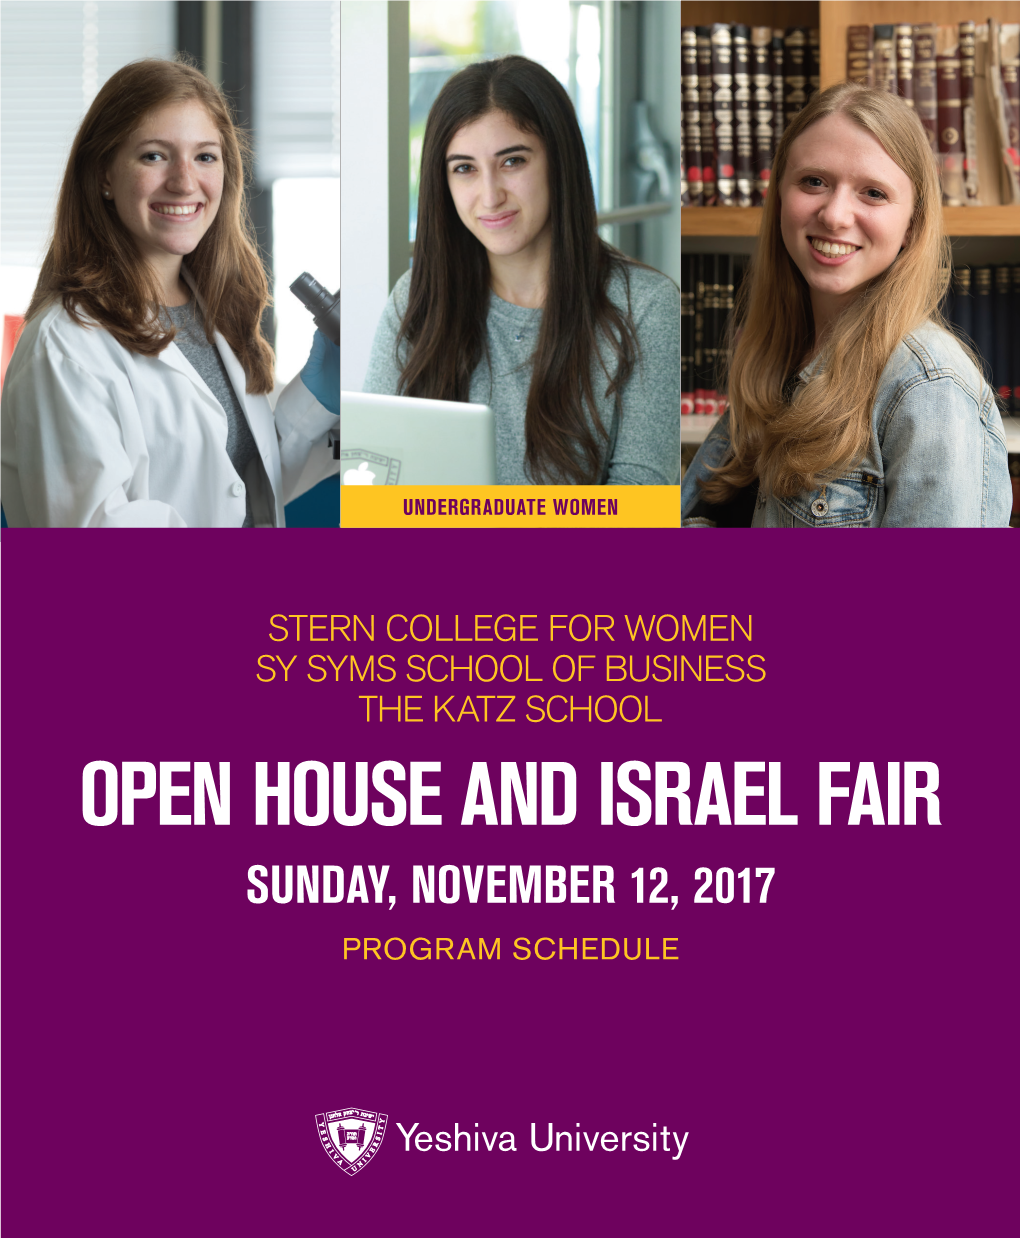 OPEN HOUSE and ISRAEL FAIR SUNDAY, NOVEMBER 12, 2017 PROGRAM SCHEDULE WELCOME to YESHIVA UNIVERSITY 9 – 9:30 A.M